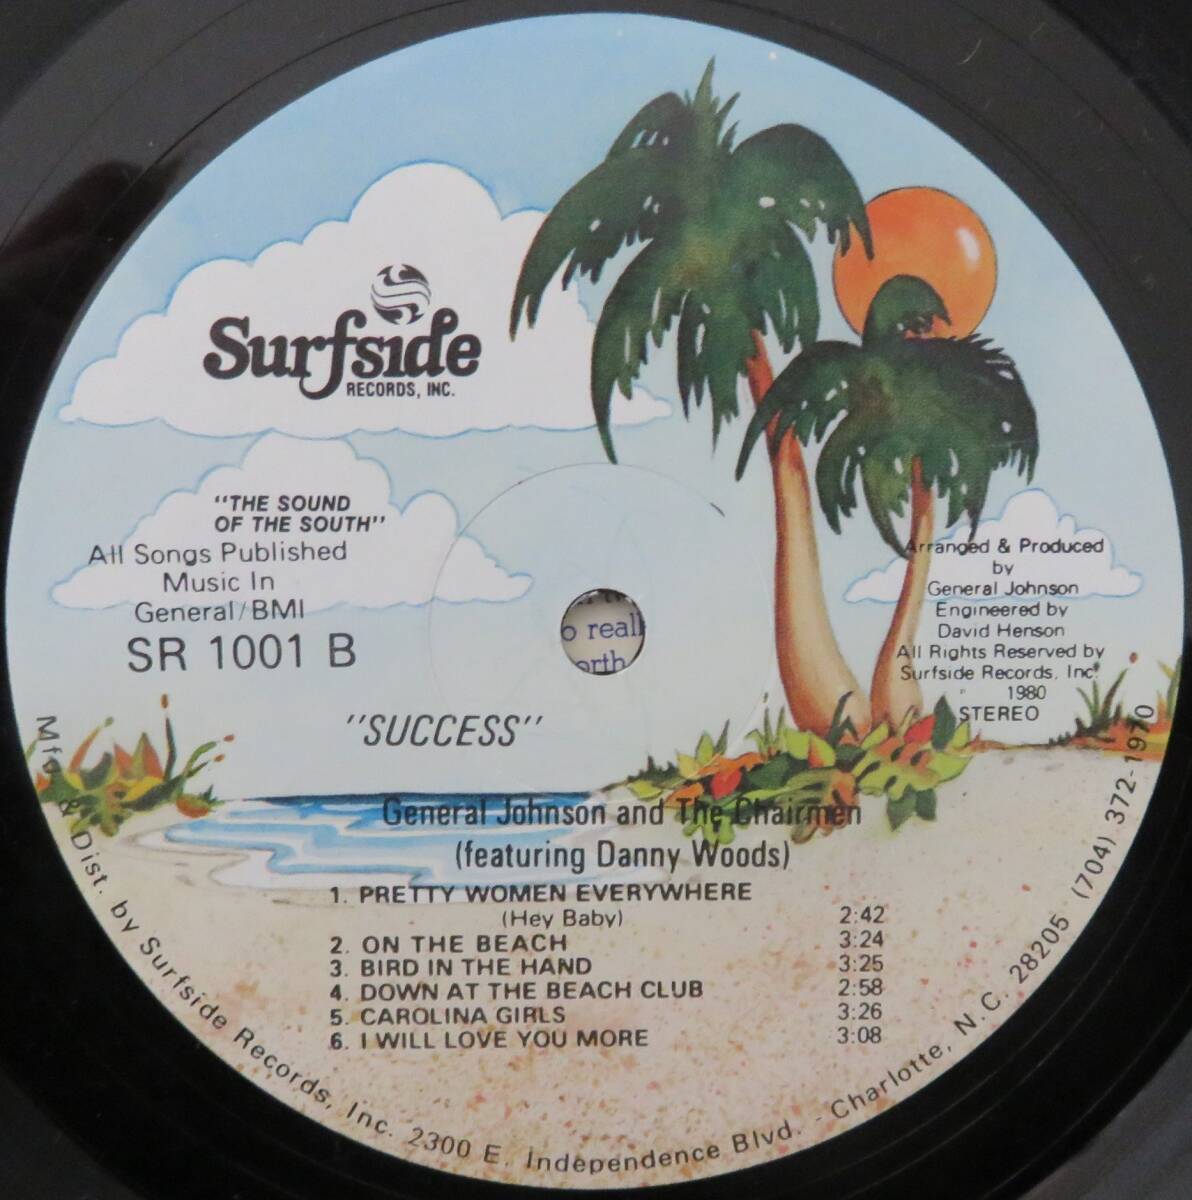 General Johnson and The CHAIRMAN also featuring Danny Woods／SUCCESS（Surfside 1001） USオリジナル盤 の画像6